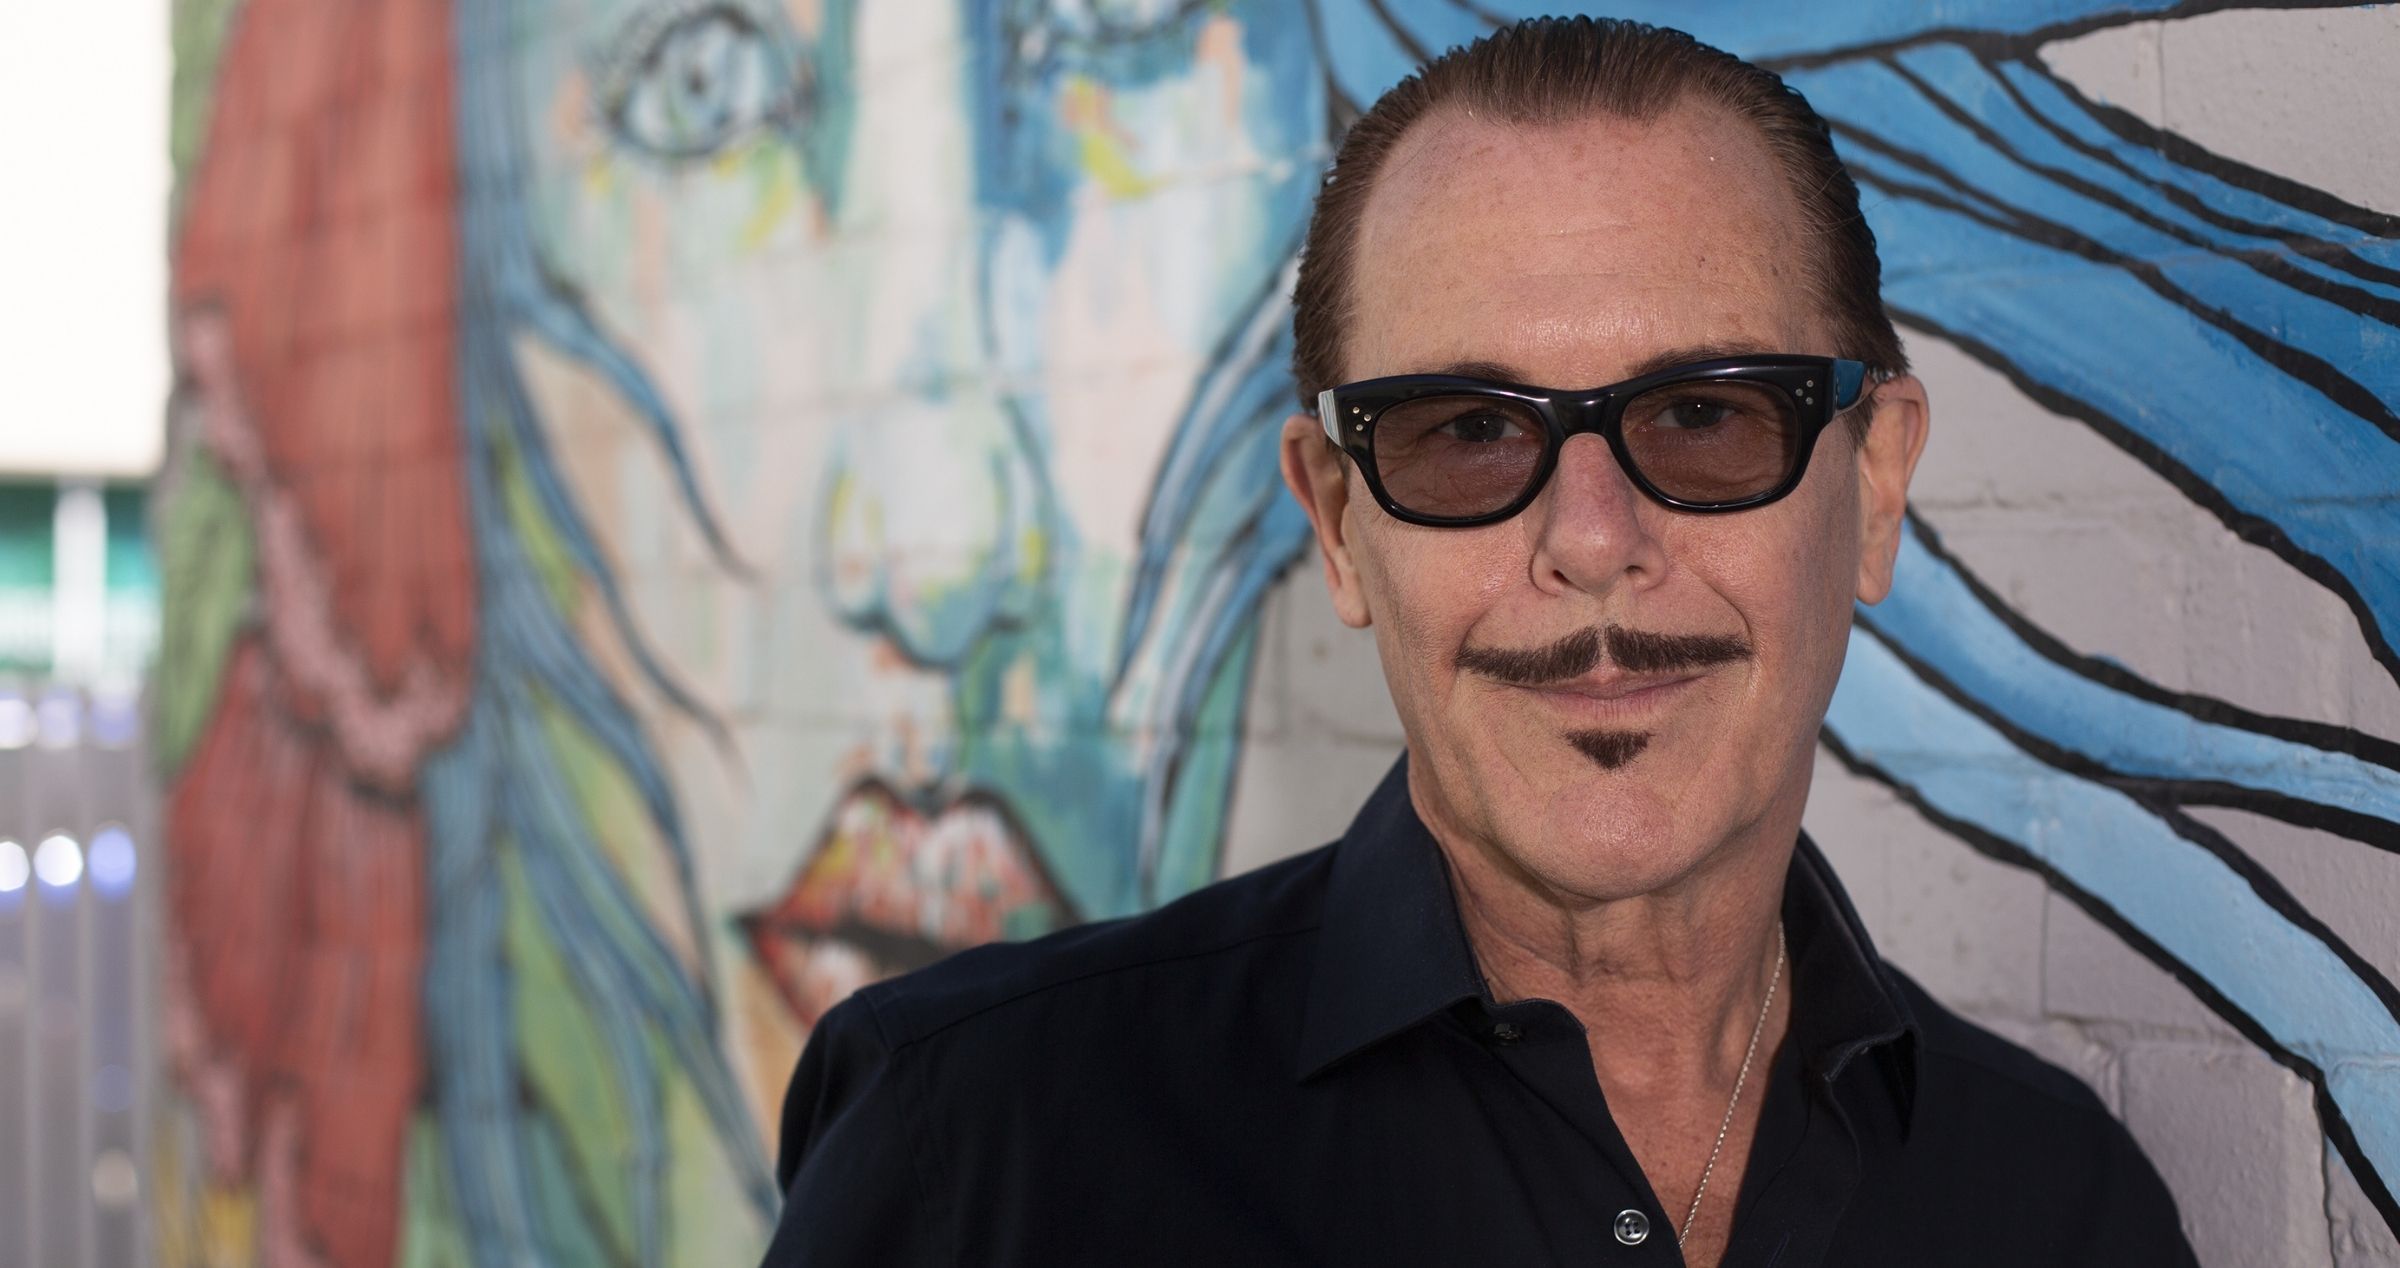 Kirk Pengilly leaning against wall with grafitti